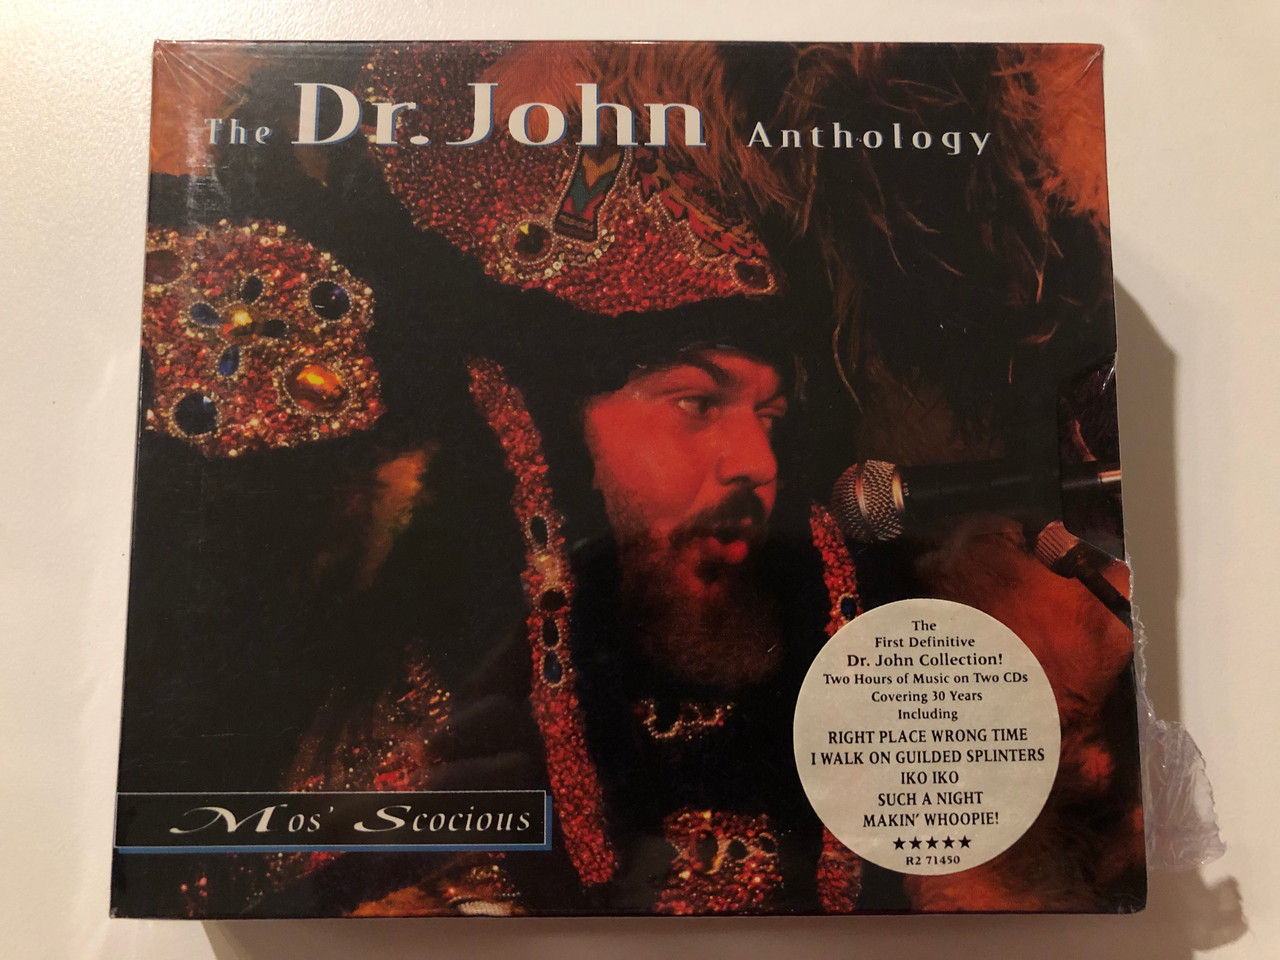 The Dr. John Anthology - Mos' Scocious / Two Hours of Music on Two CDs  Covering 30 Years